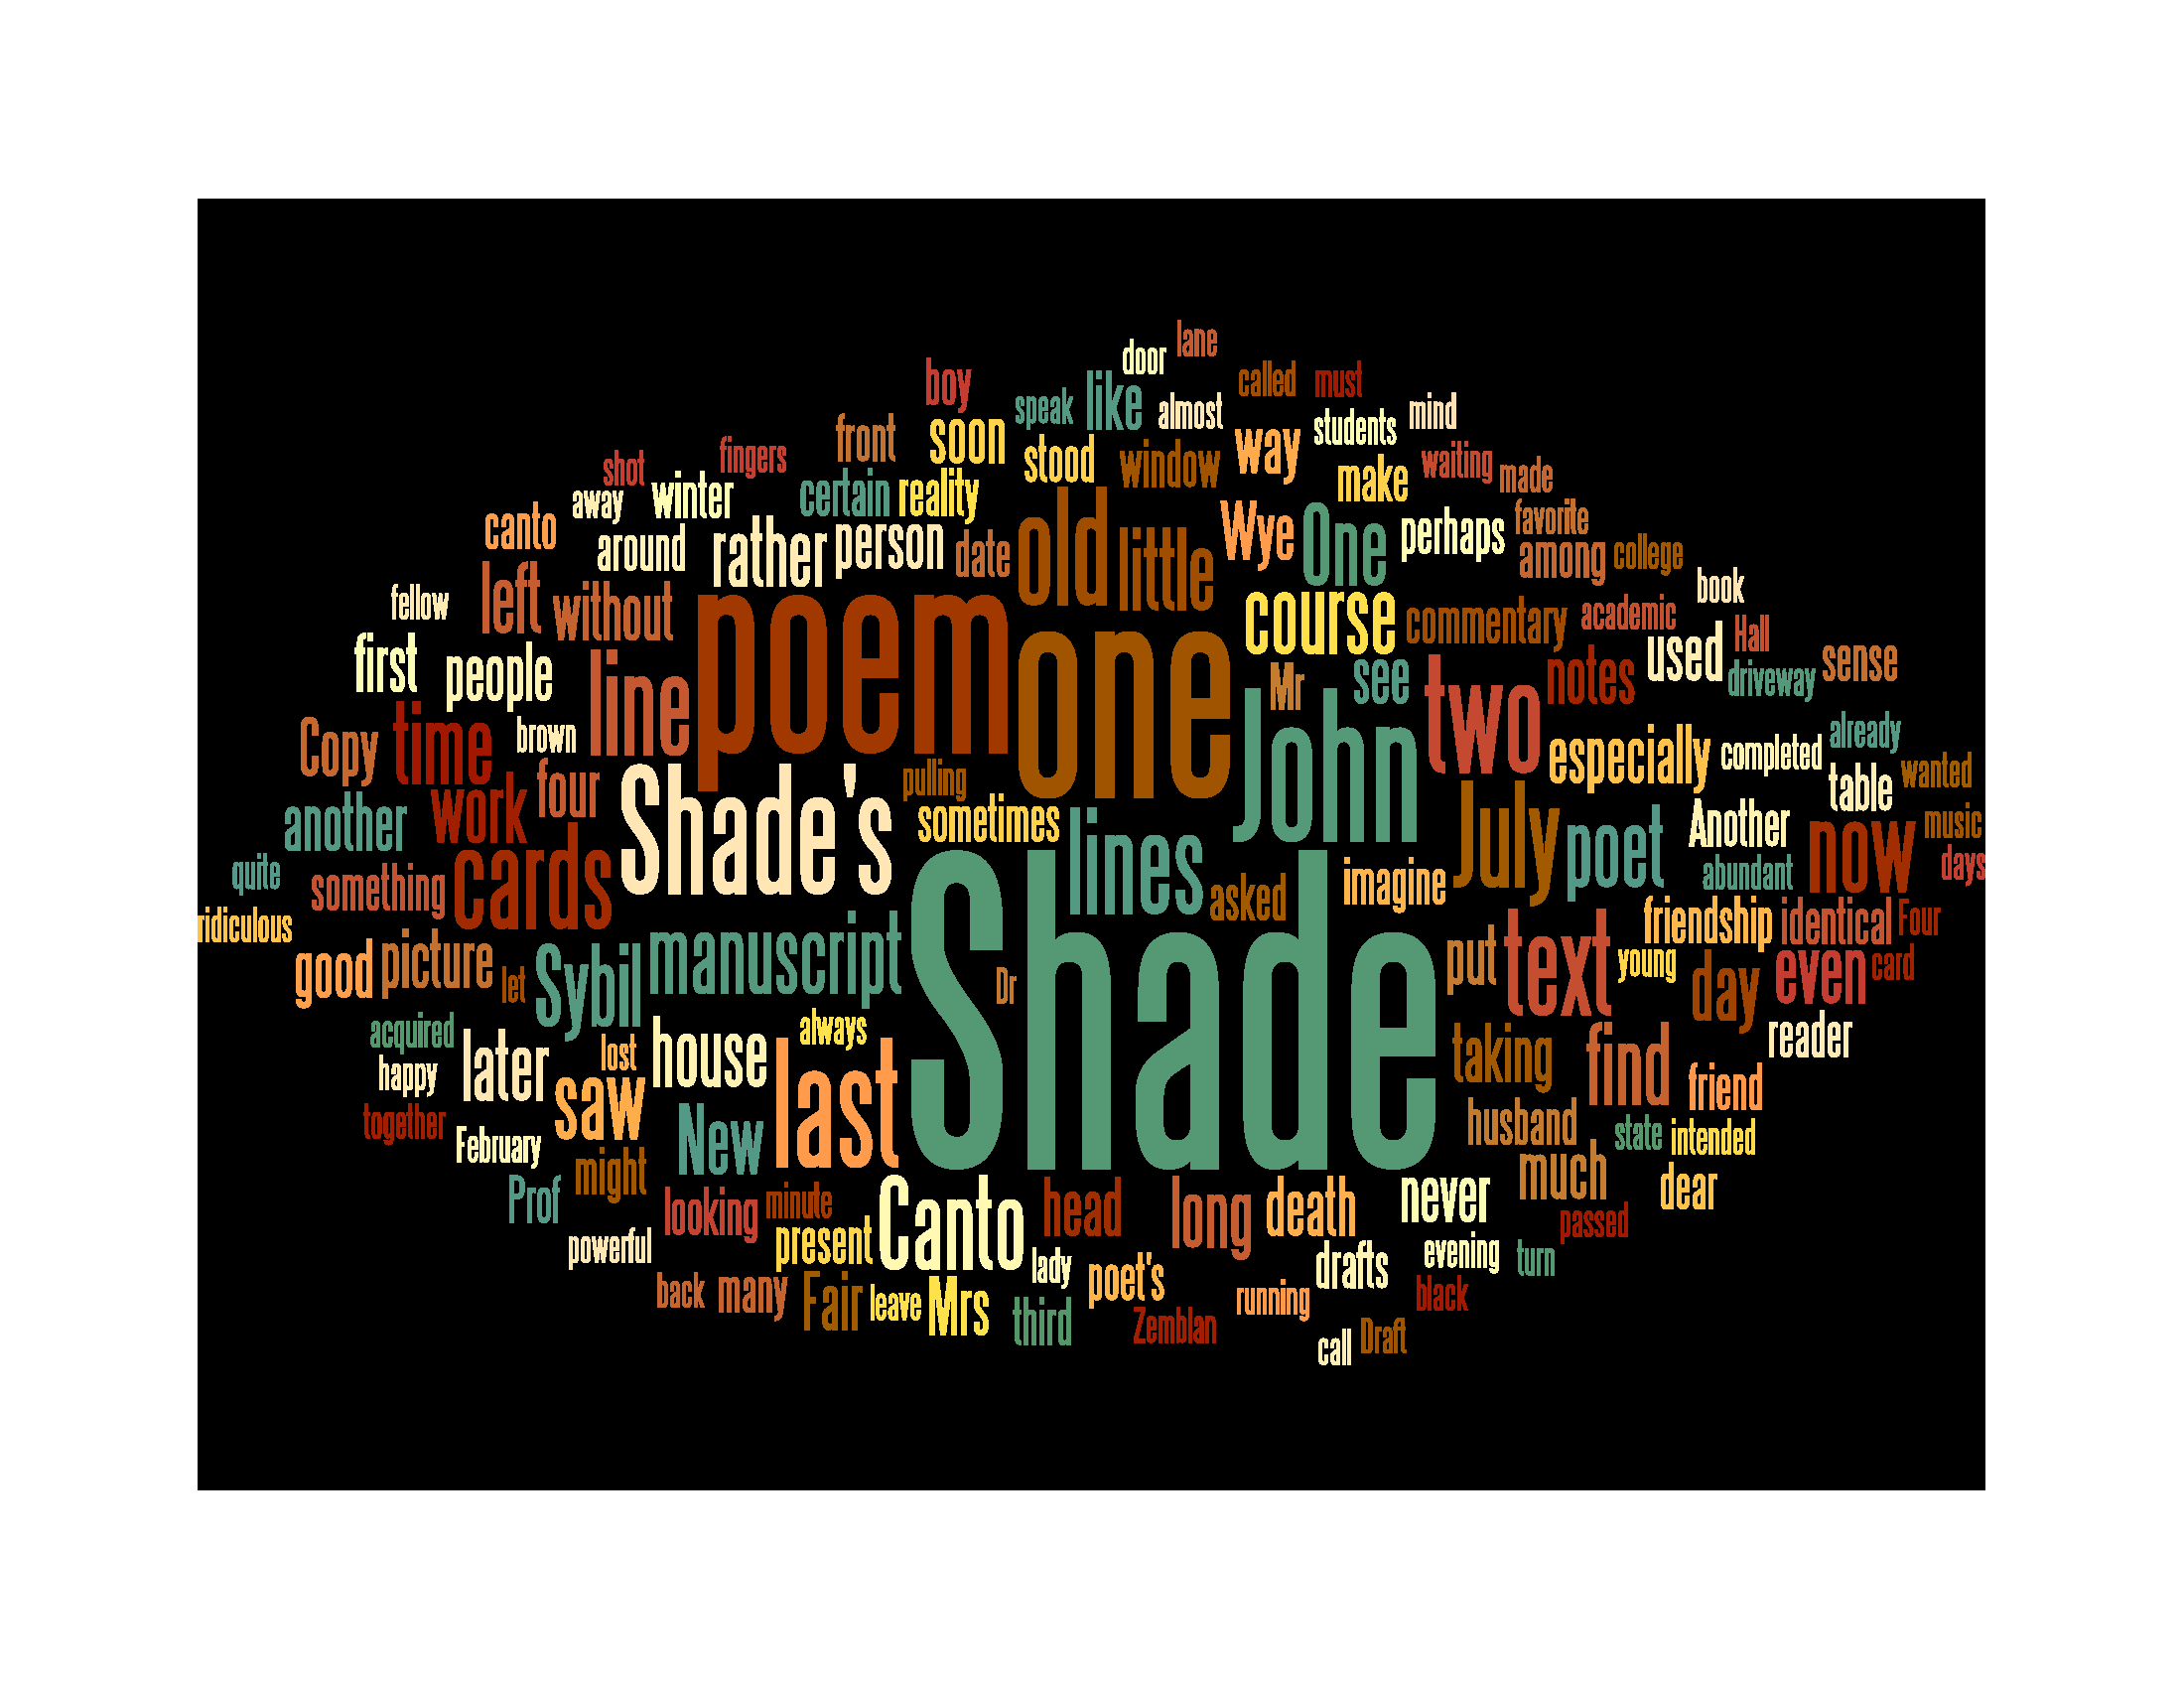 PF Foreword "word cloud"